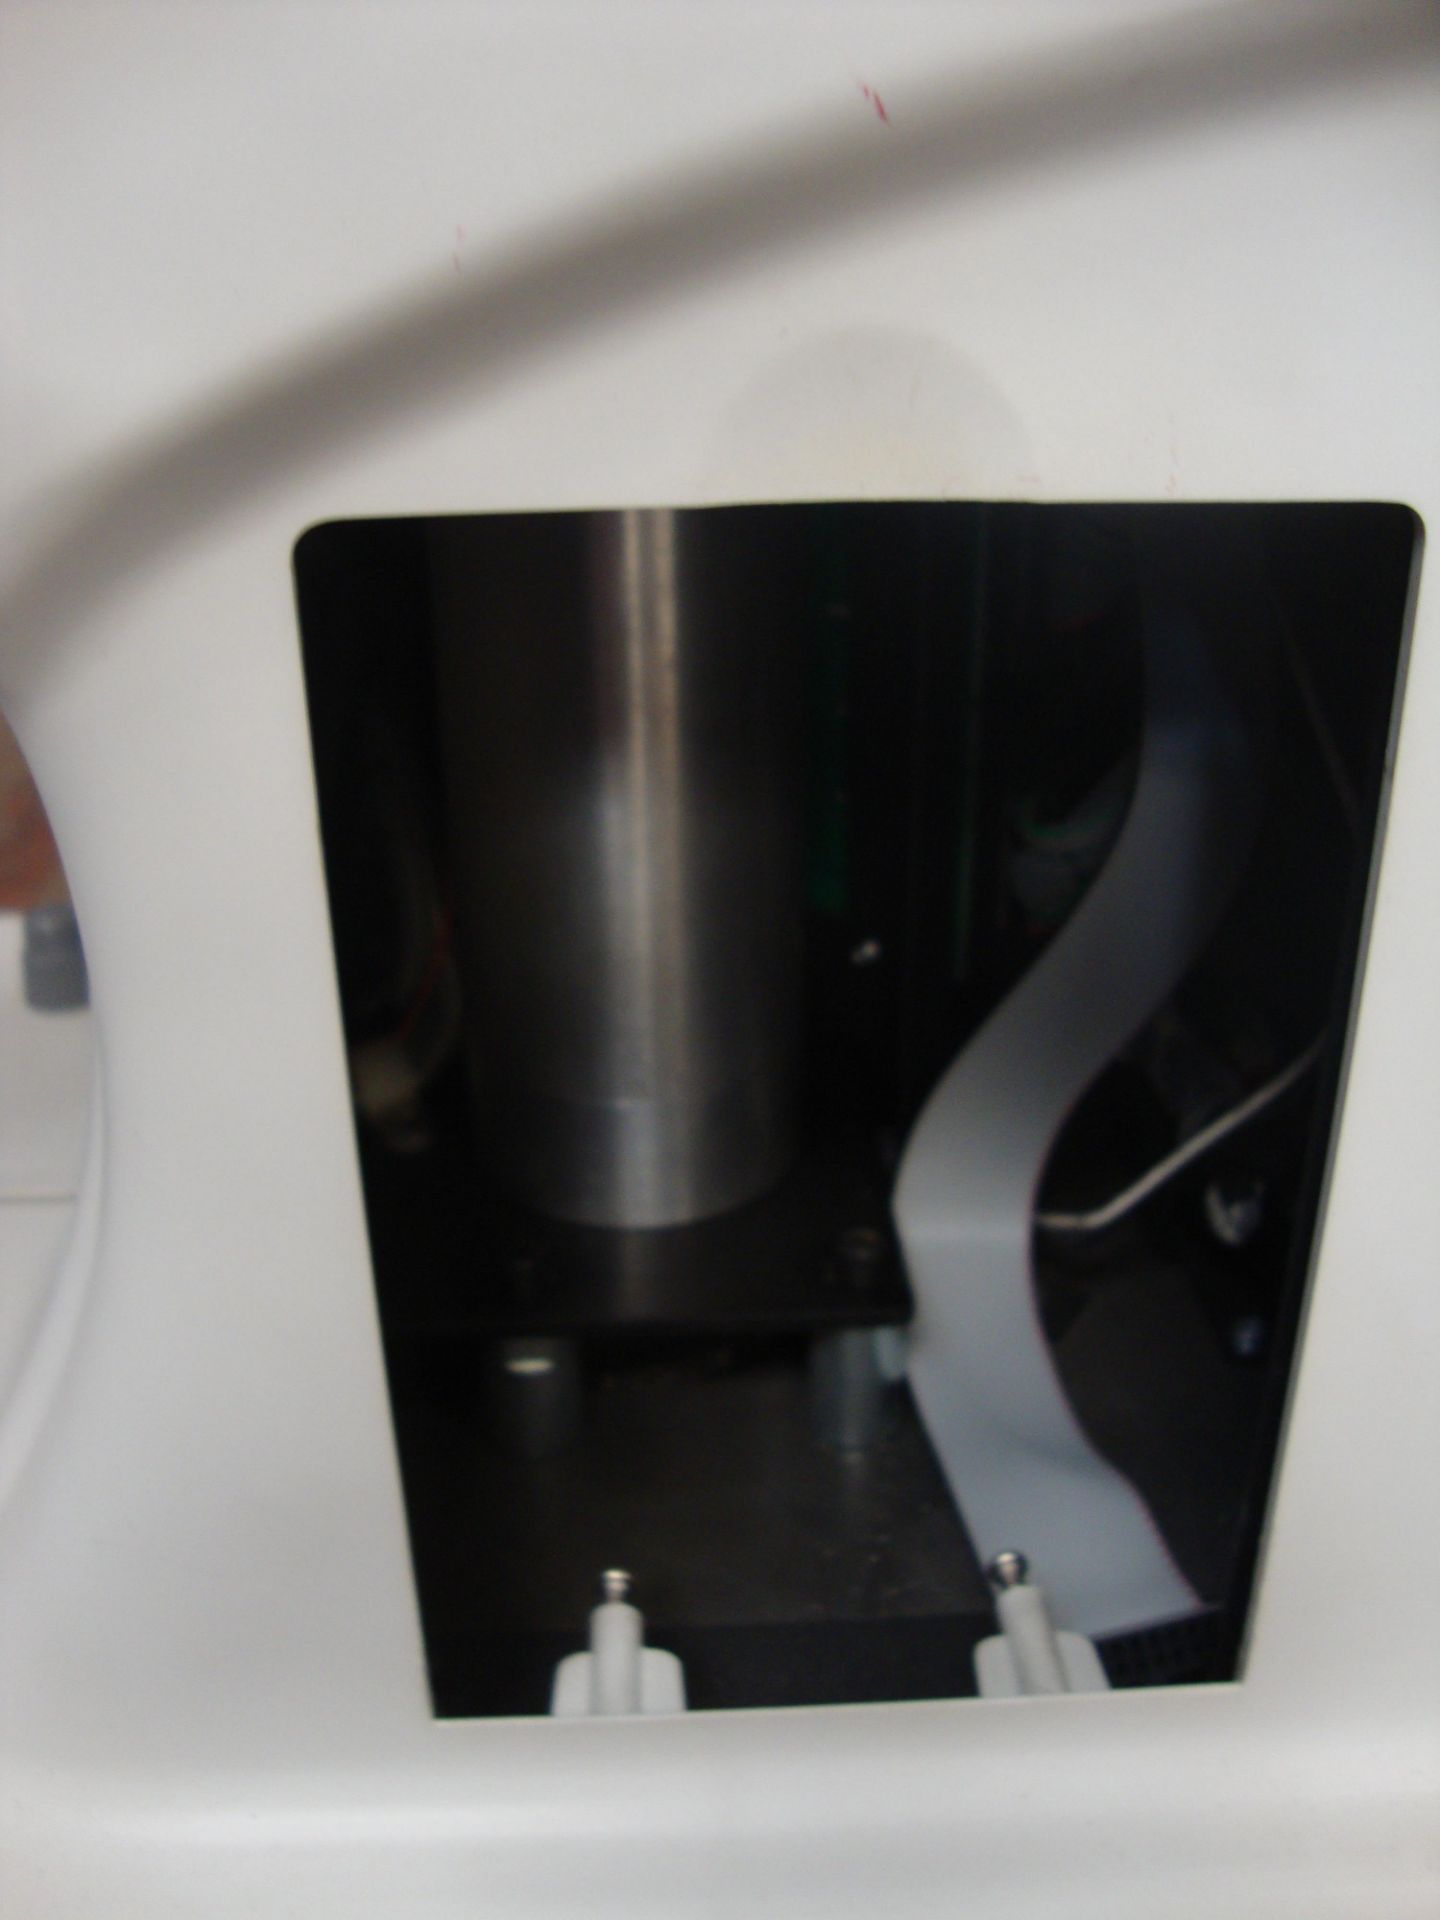 M DOP model RMK-200 autoref keratometer All the lots in this auction are being sold on behalf of - Image 2 of 5